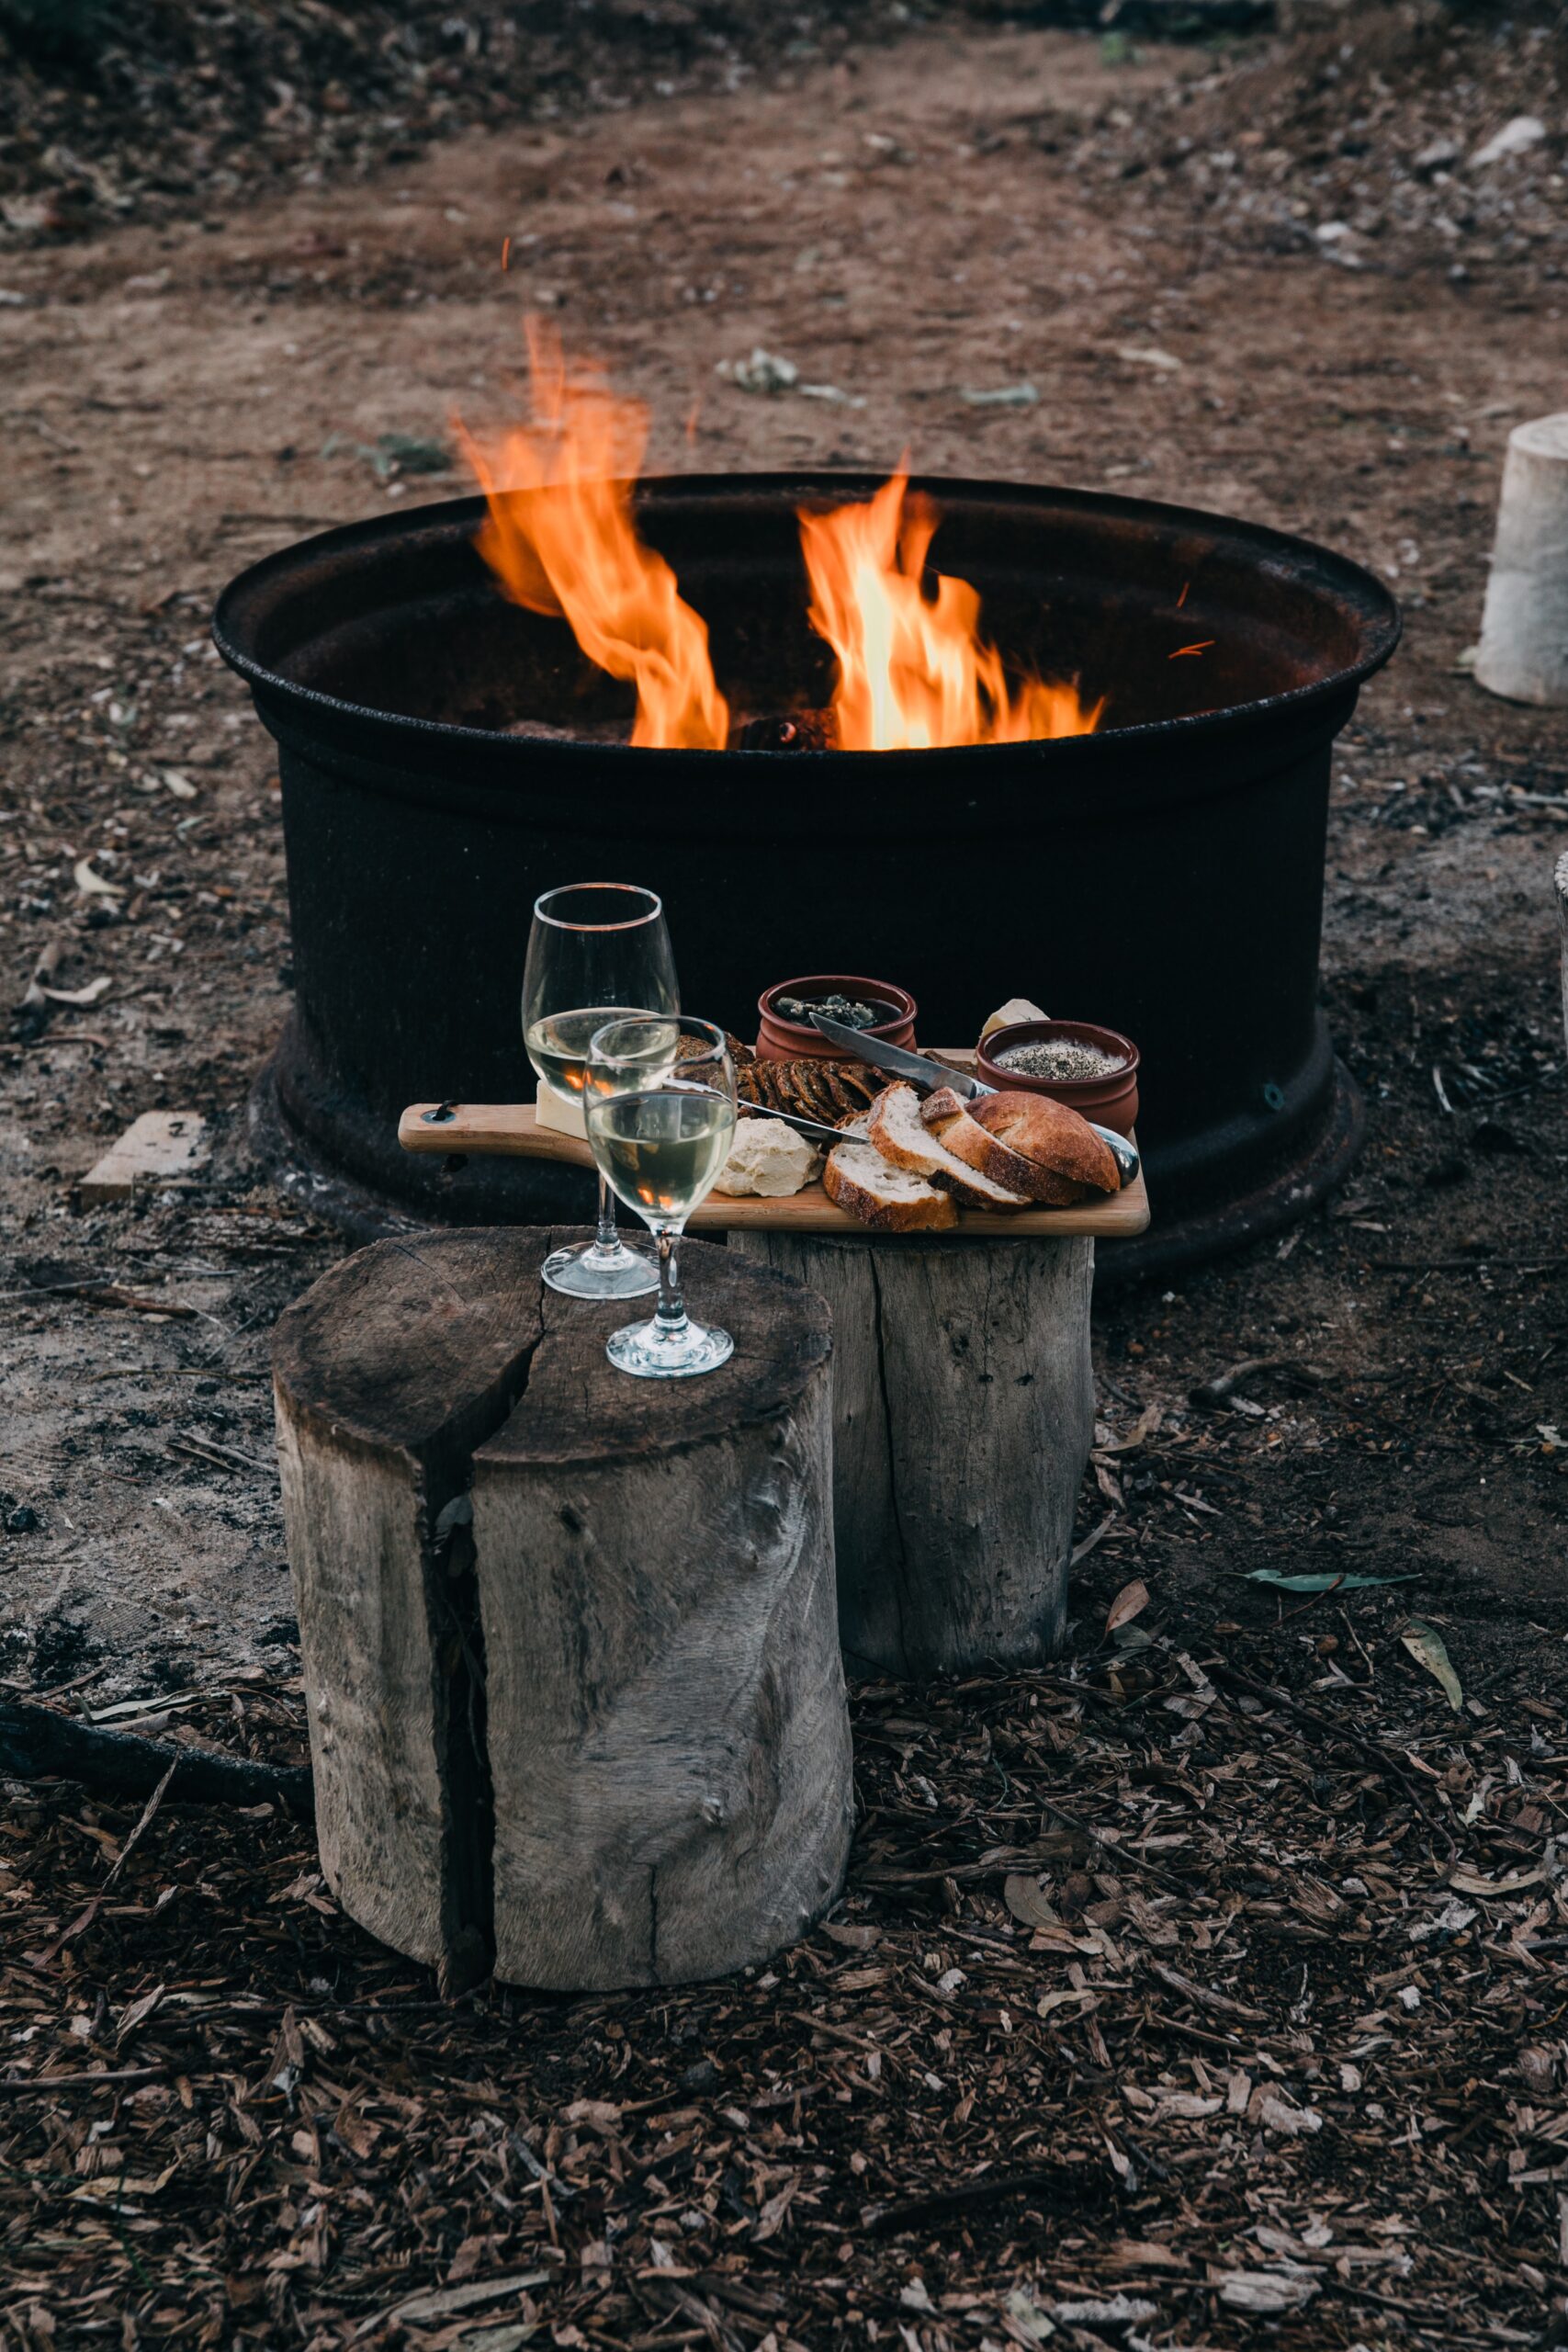 Image represents time off. A bonfire burns near tree stumps. On the stumps are snacks and wine glasses. 